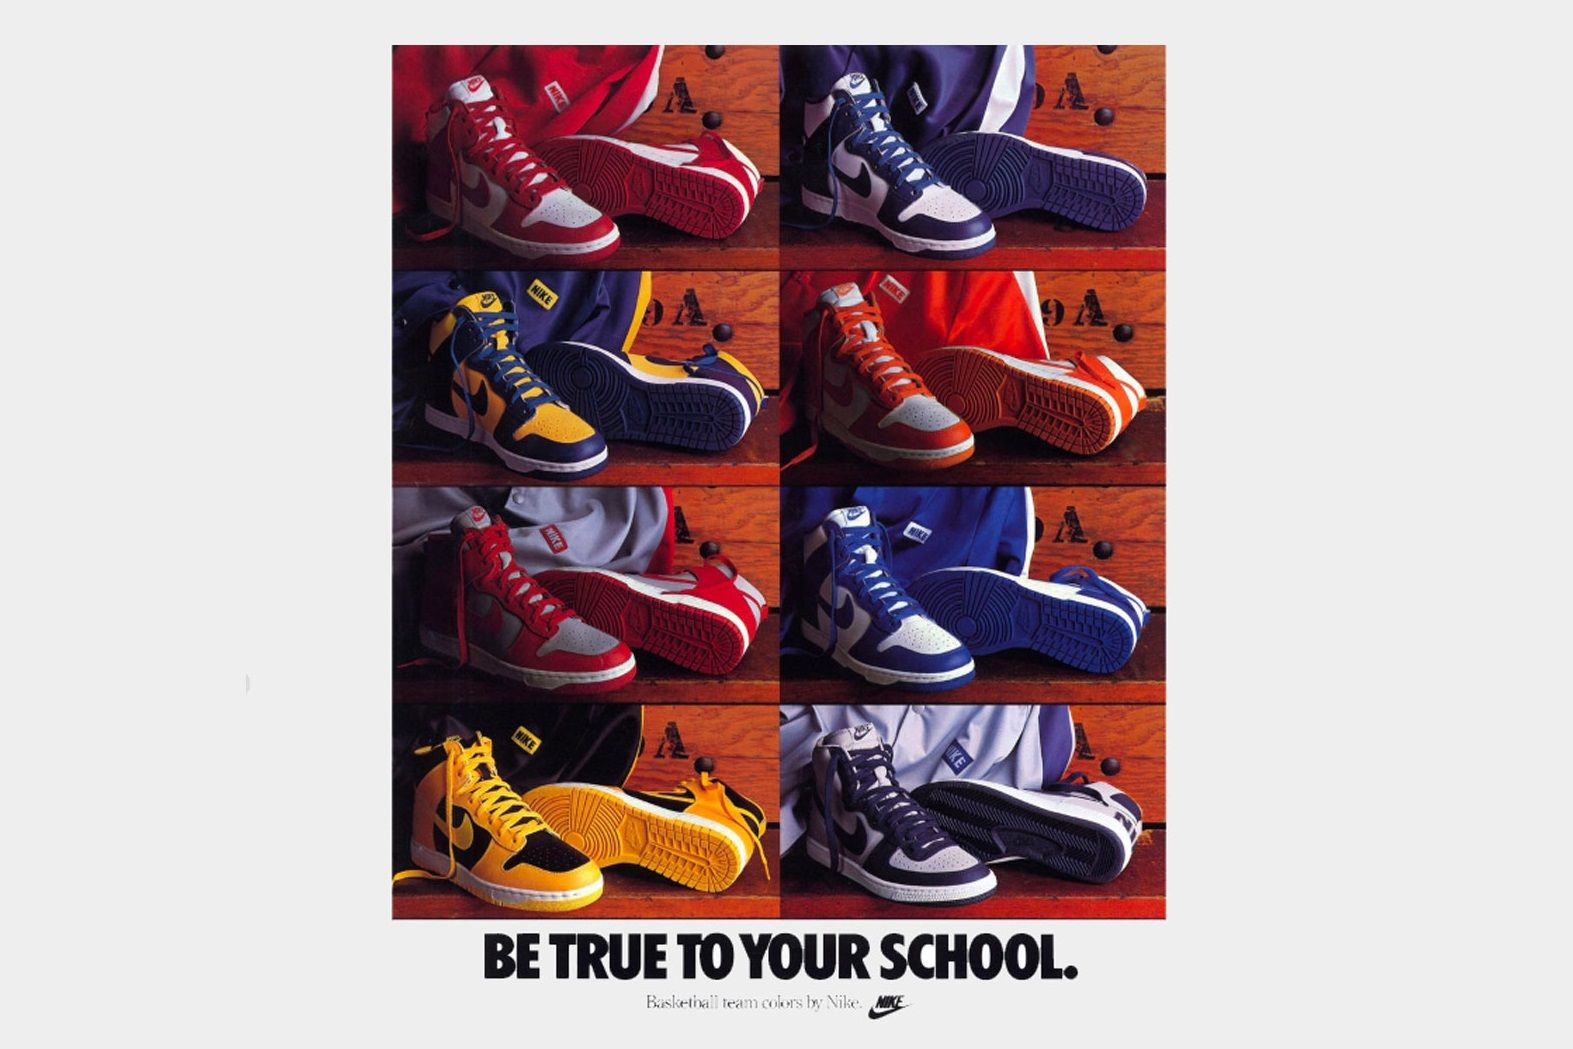 Nike Dunk poster of 8 college-themed high-top sneakers.